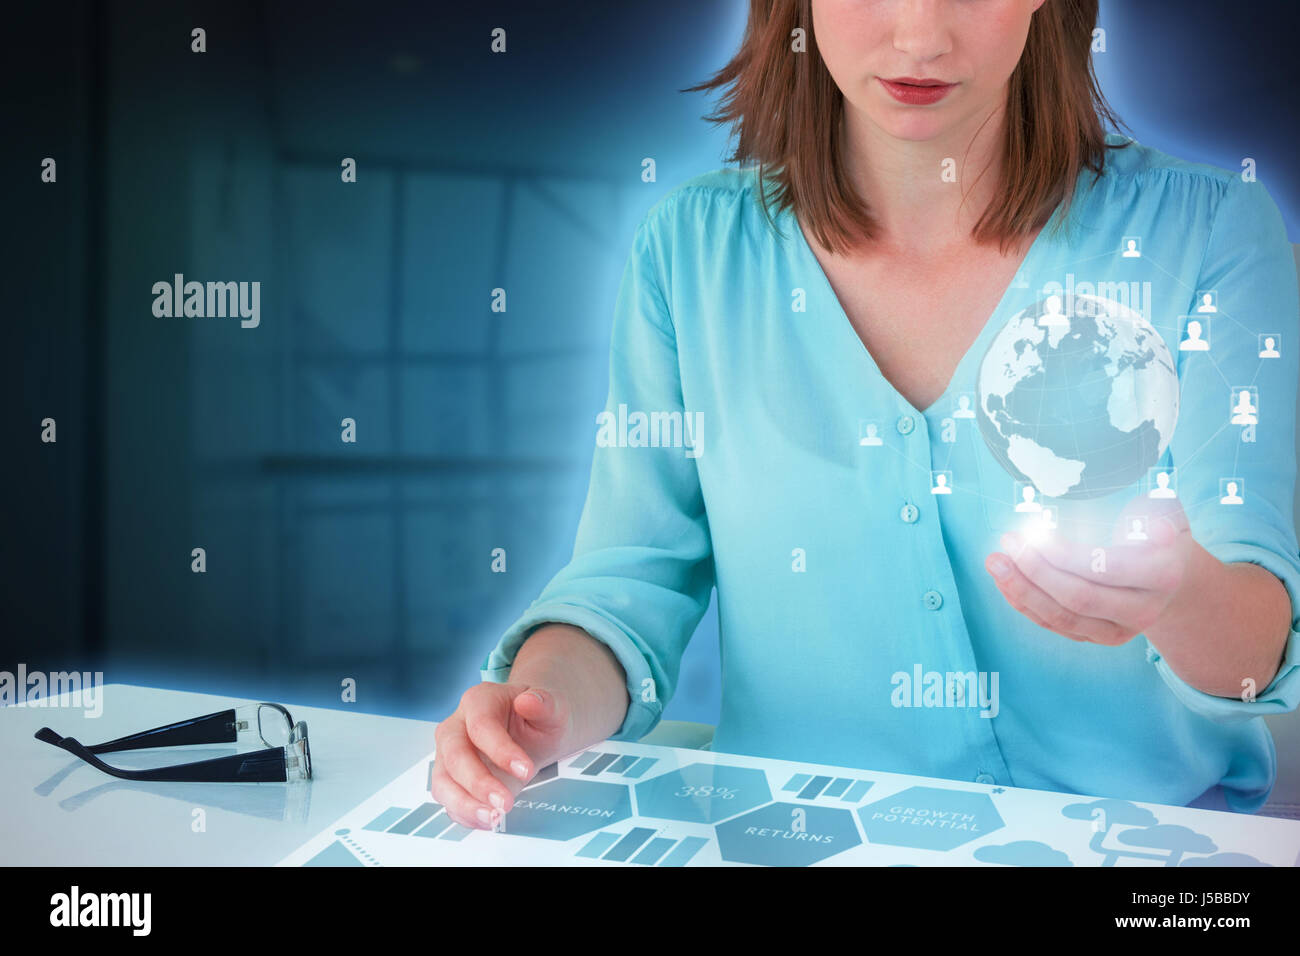 Businesswoman sitting at desk and using digital screen against composite image of graph Stock Photo